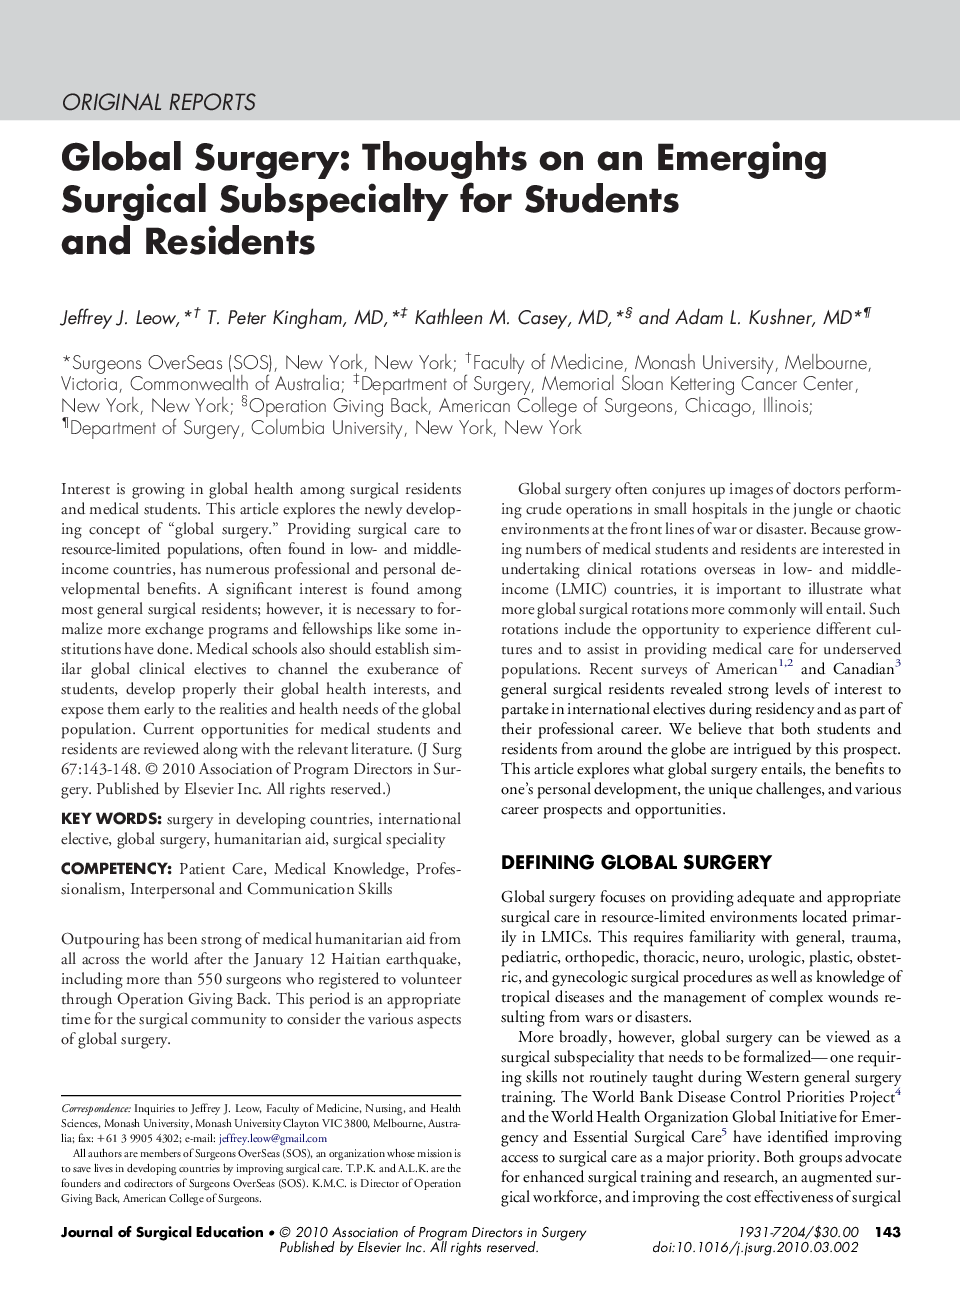 Global Surgery: Thoughts on an Emerging Surgical Subspecialty for Students and Residents 